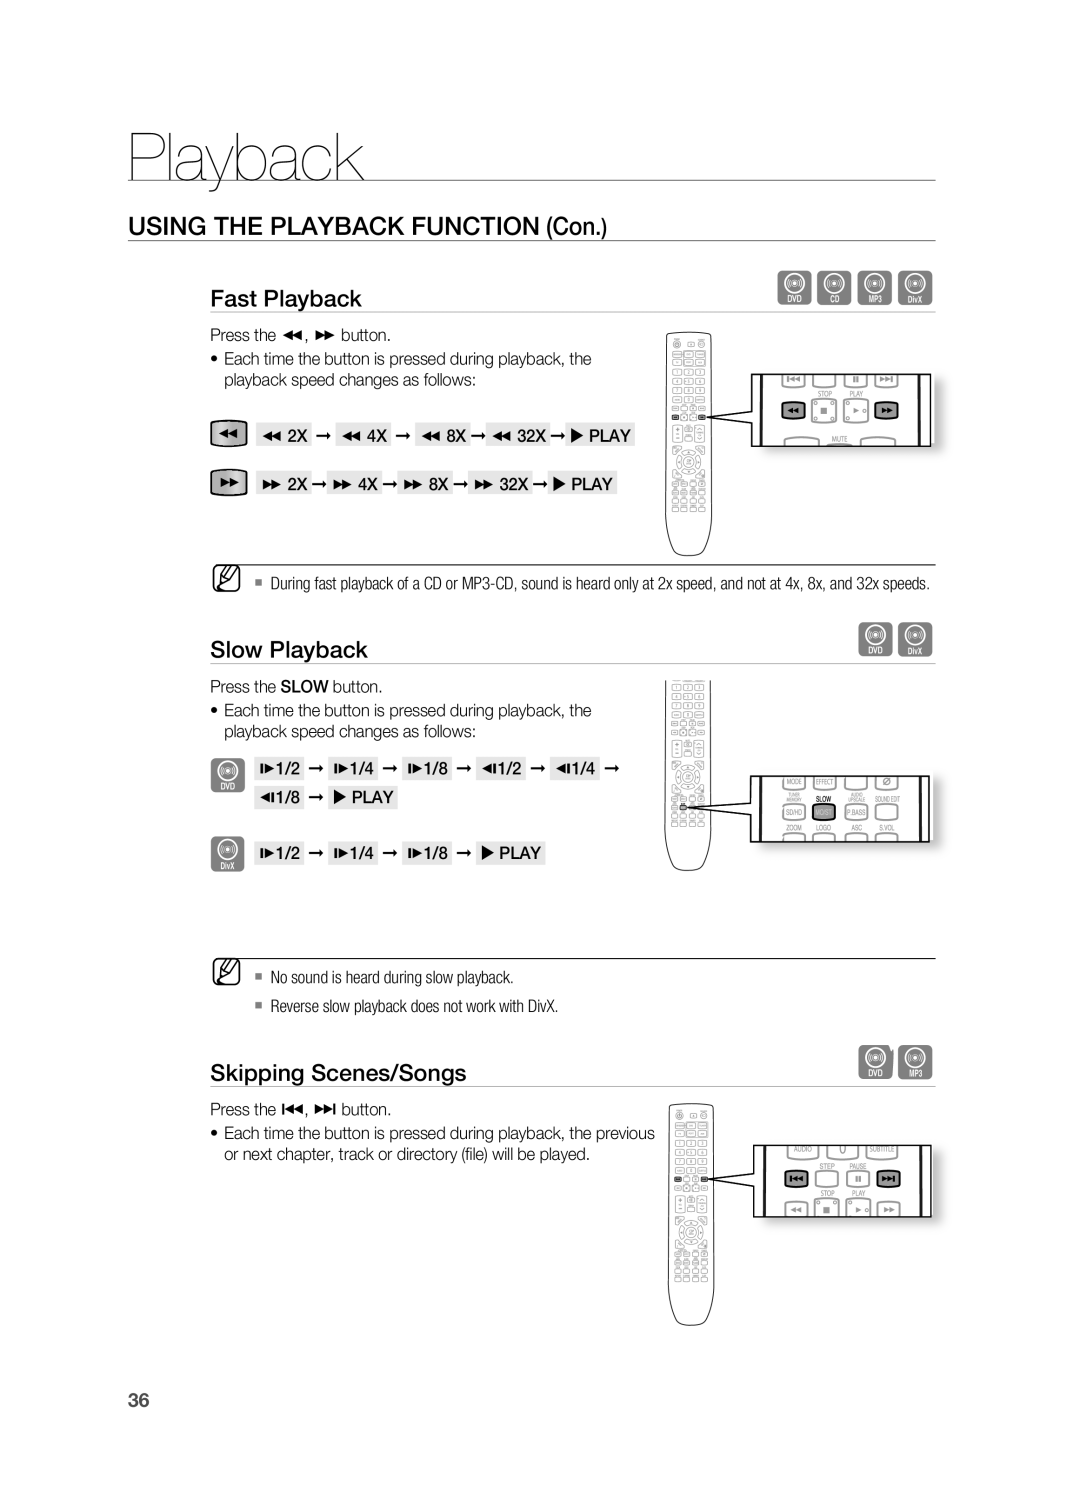 Samsung HT-X725G, HT-TX725G user manual USING THE PLAYBACK FUNCTION Con, Playback 